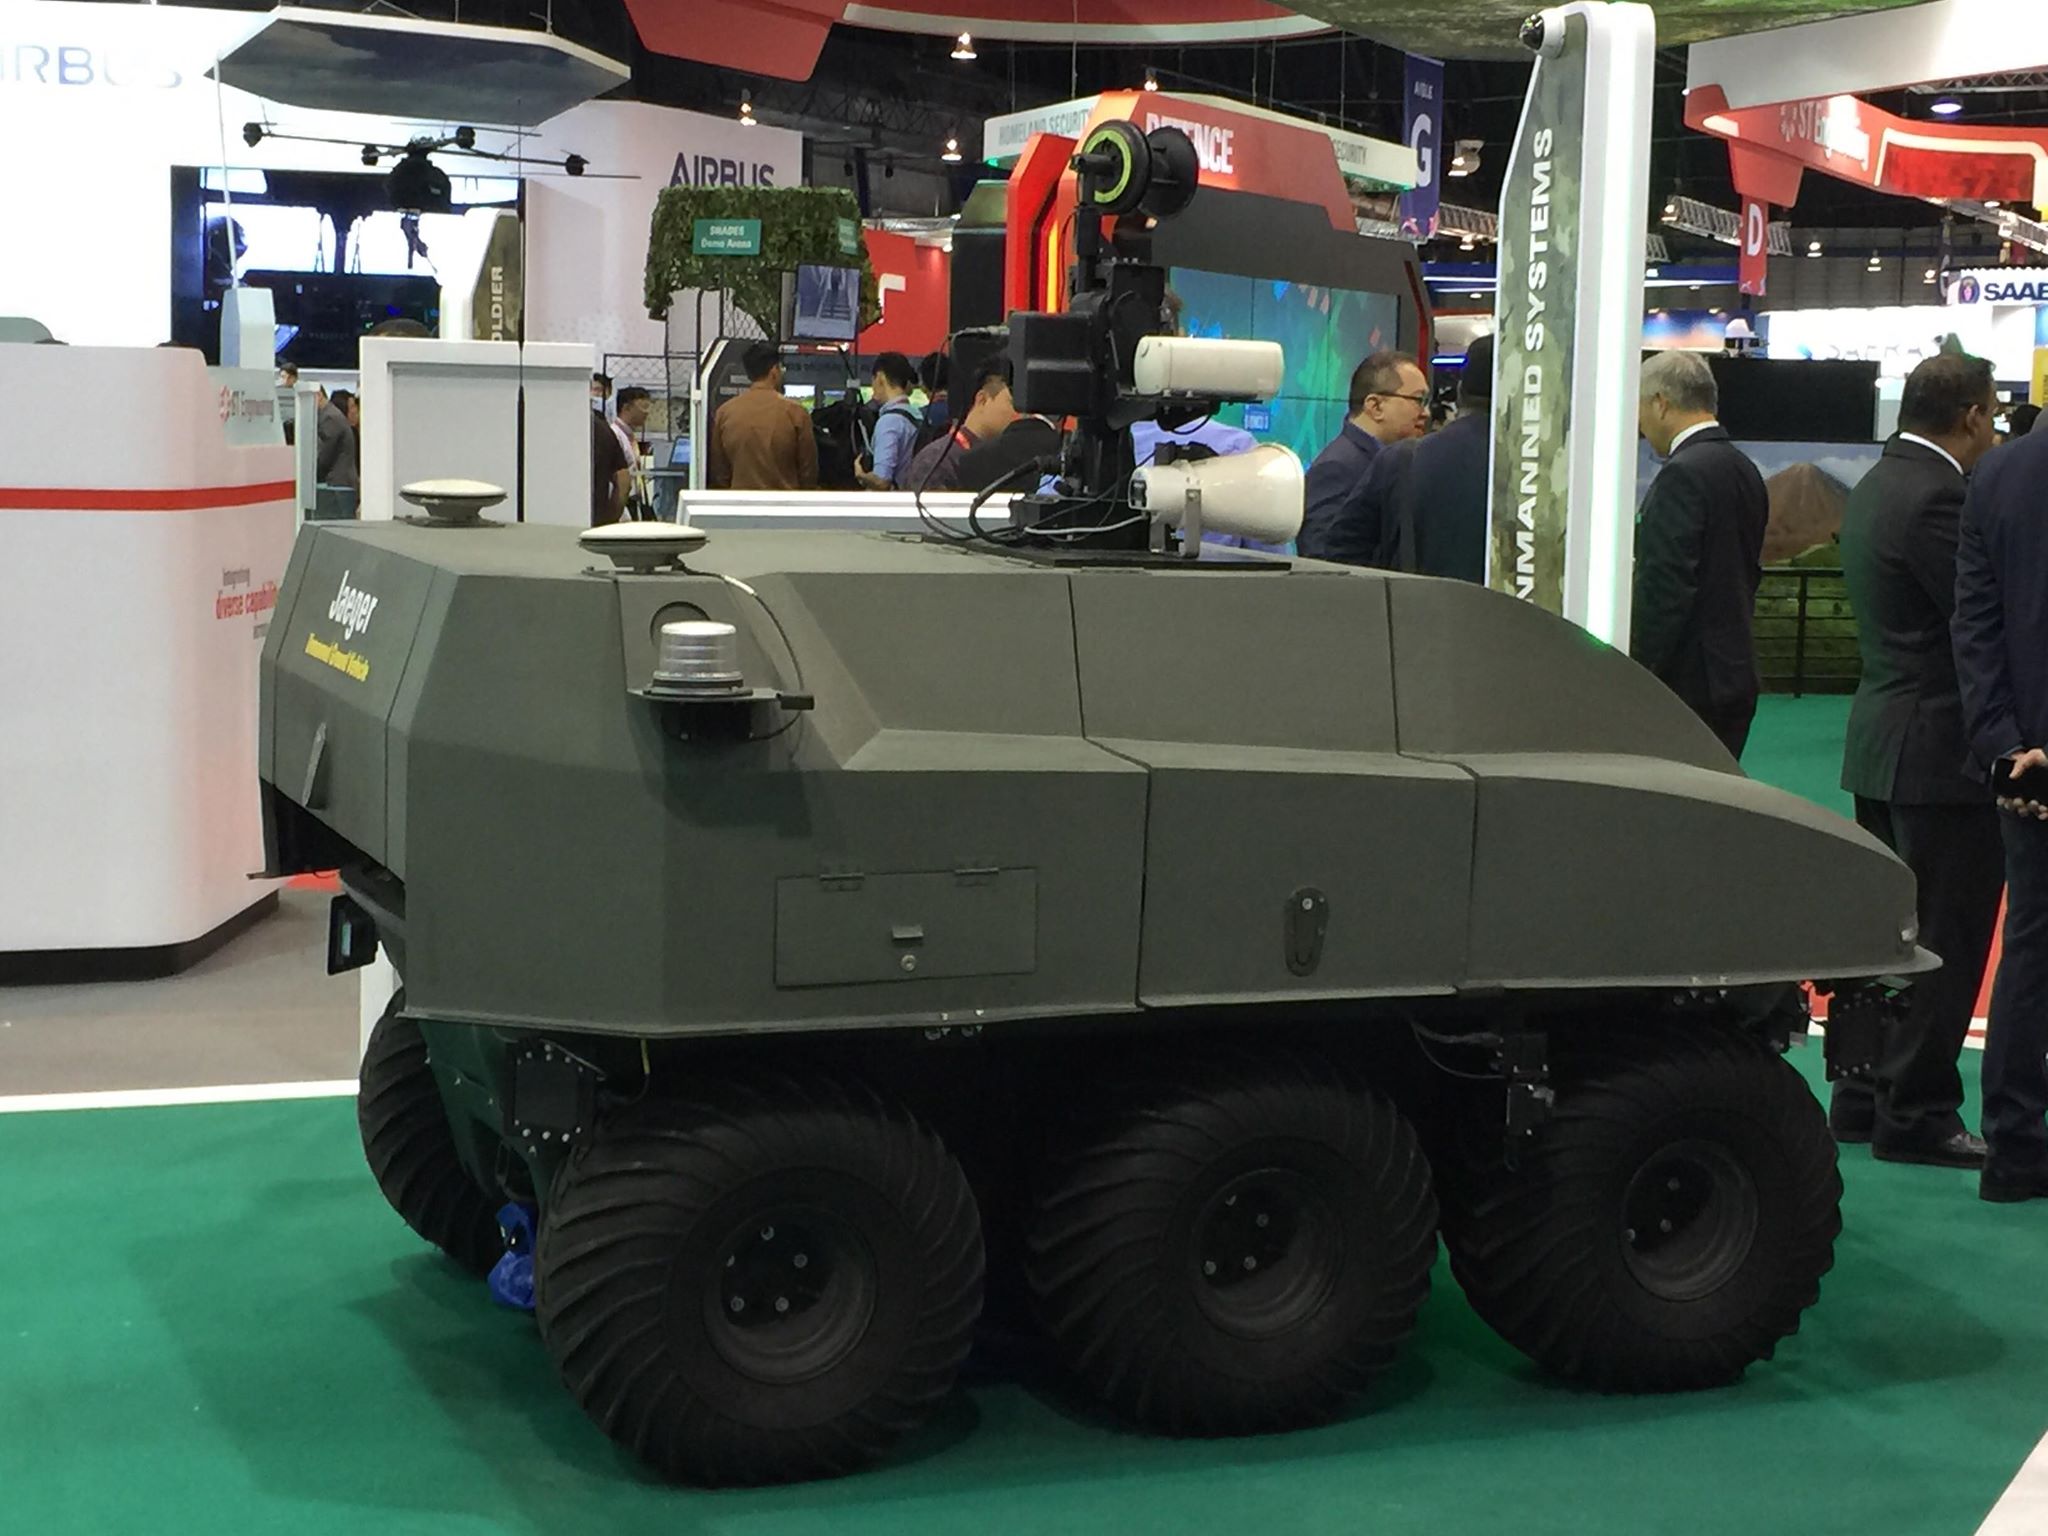 St Engineering Unveils New Jaeger 6 Unmanned Ground Vehicle